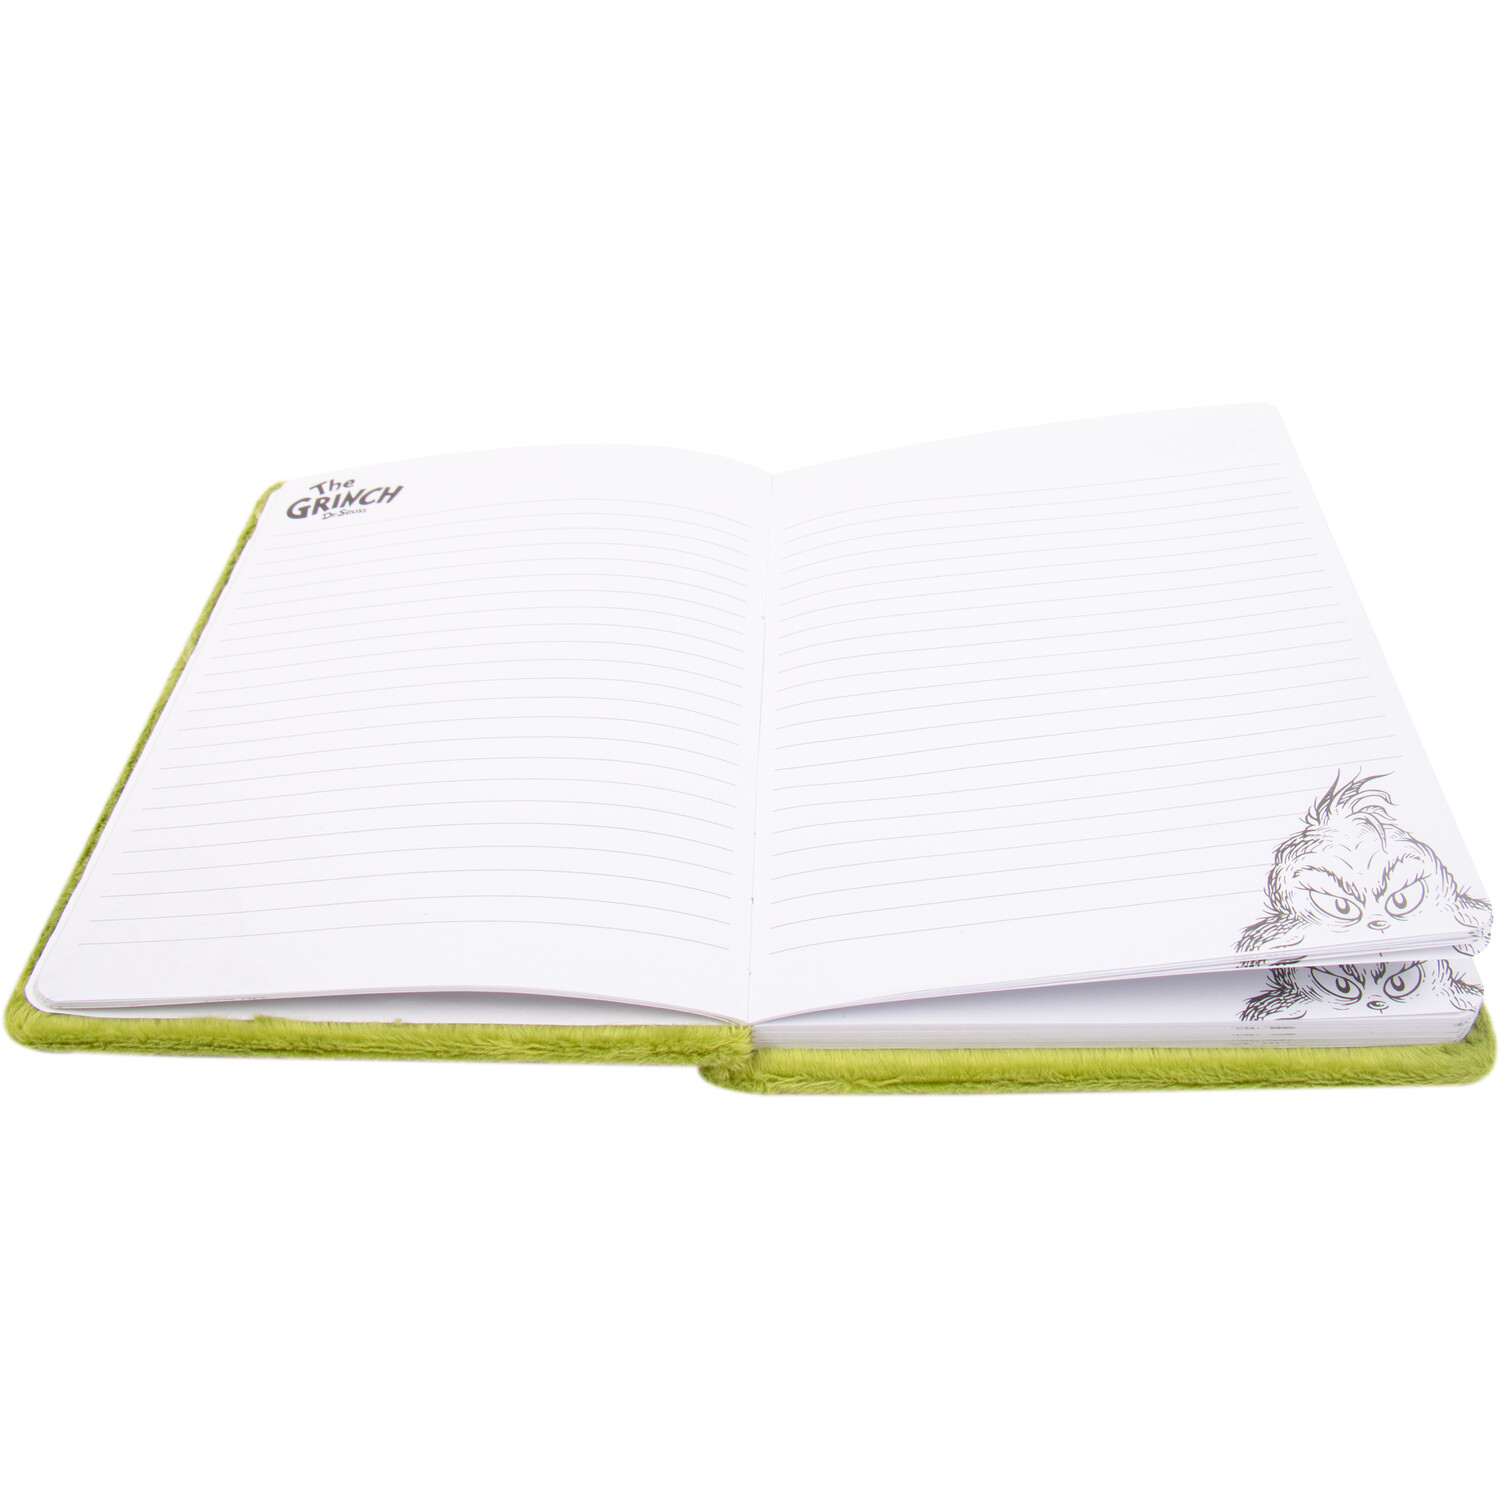 The Grinch Fluffy Notebook - Green Image 2